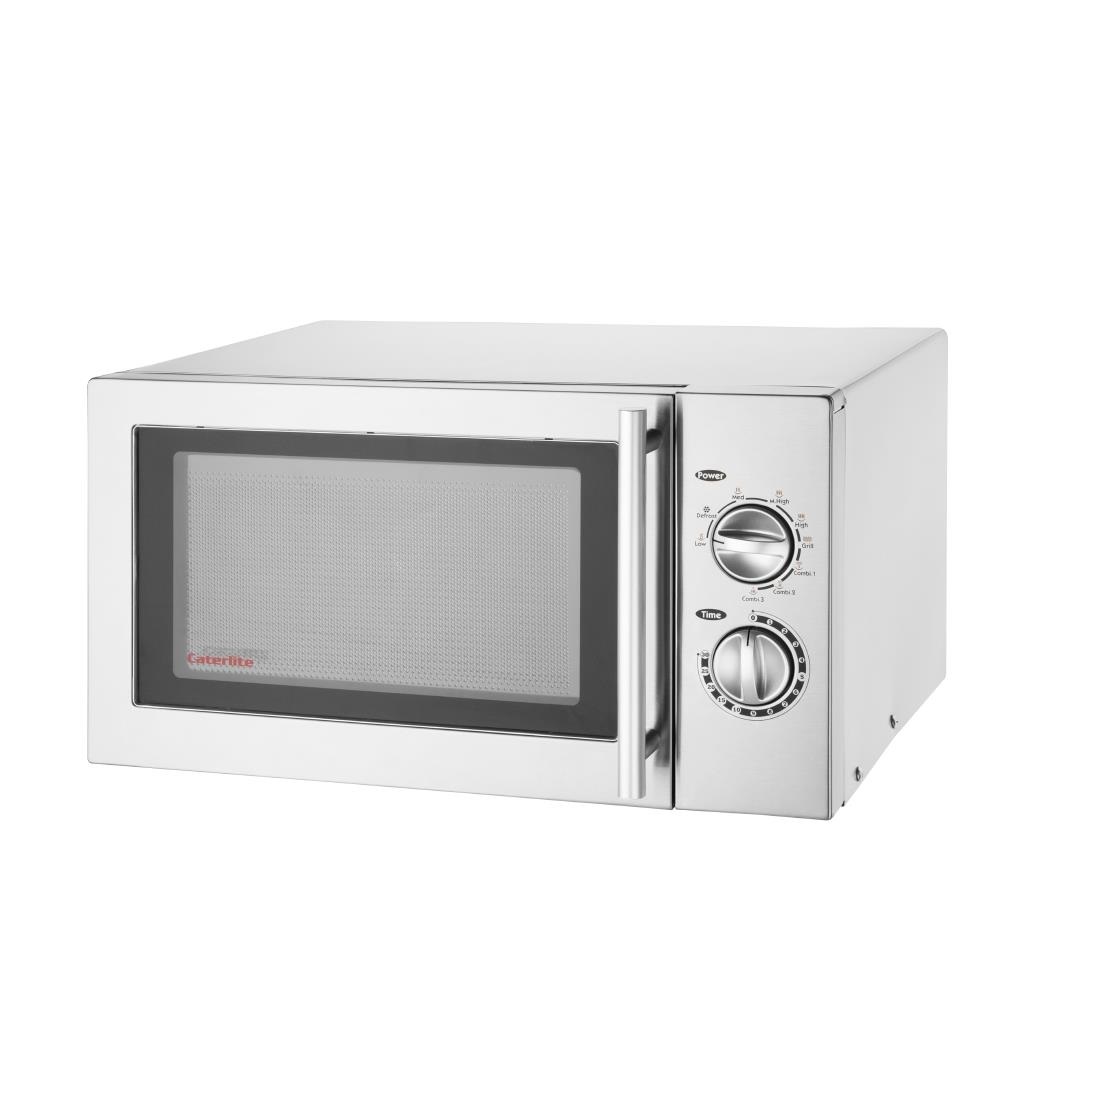 Caterlite Manual Microwave and Grill (CK018)